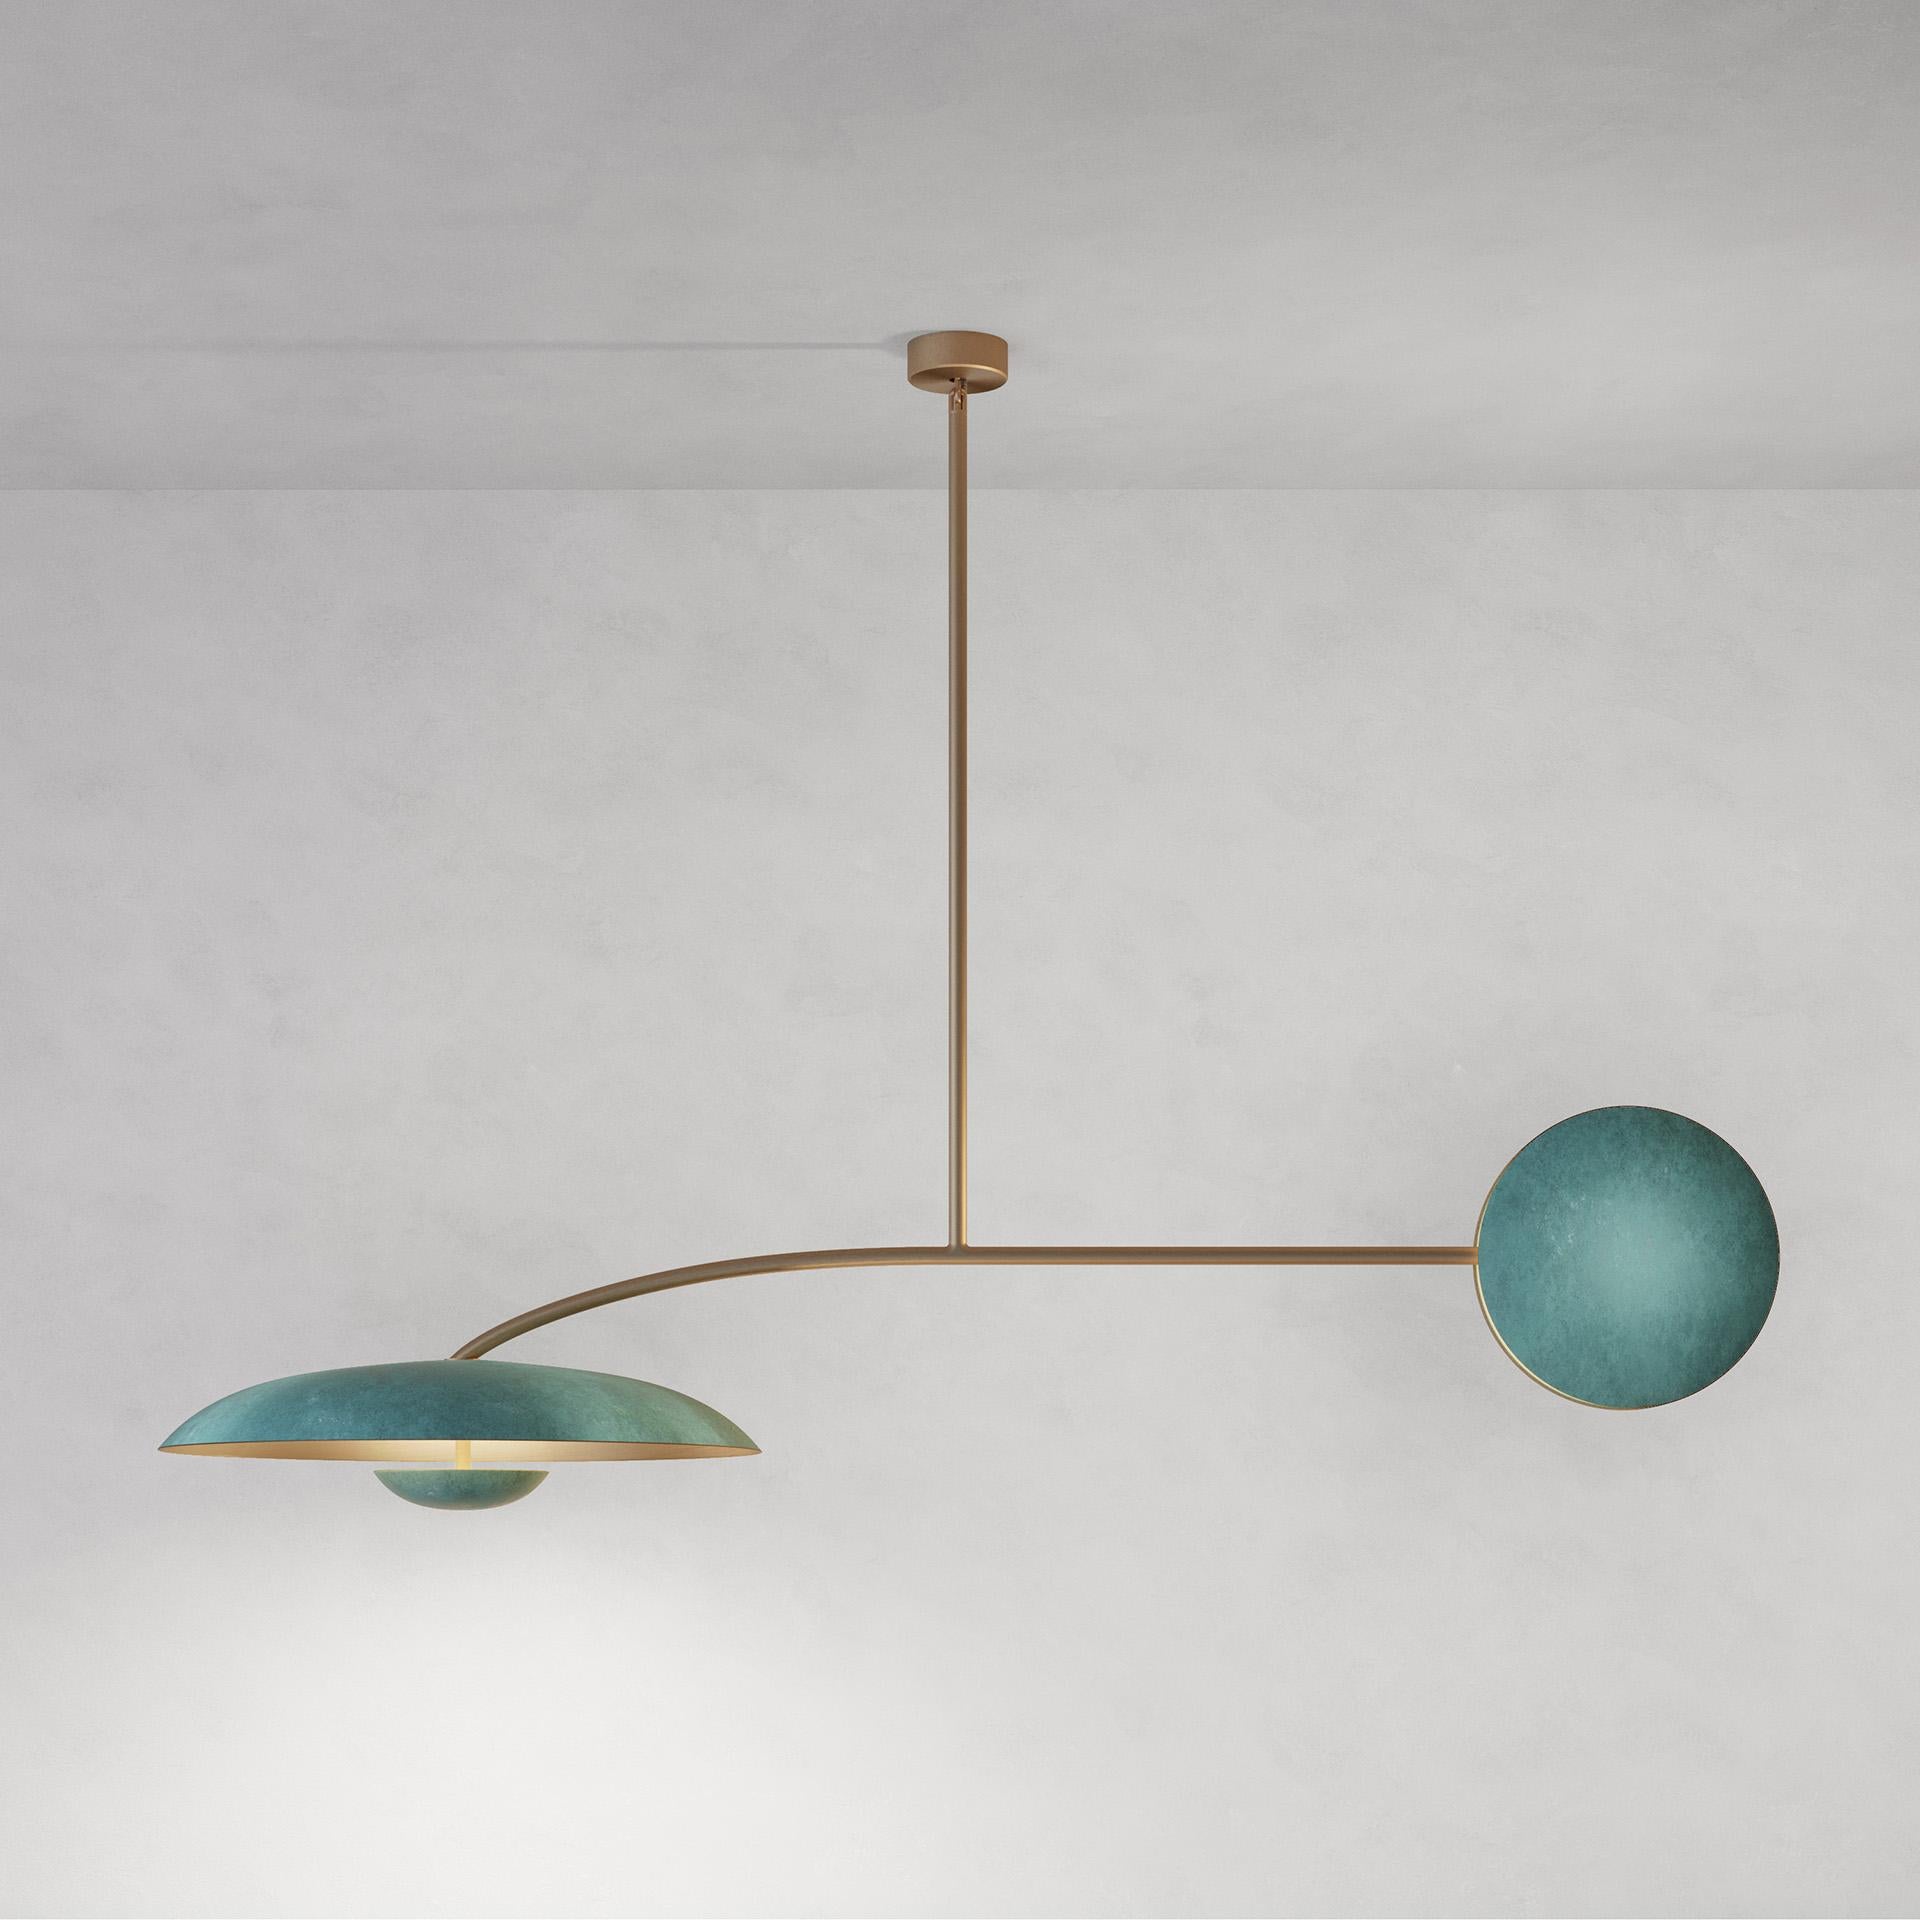 Orbit Solo Verdigris Ceiling Light by Atelier001
Dimensions: D60 x W160 X H115 cm
Materials: Shade Verdigris patinated brass
Framework Satin brass
Also Available: In different finishes.

All our lamps can be wired according to each country. If sold